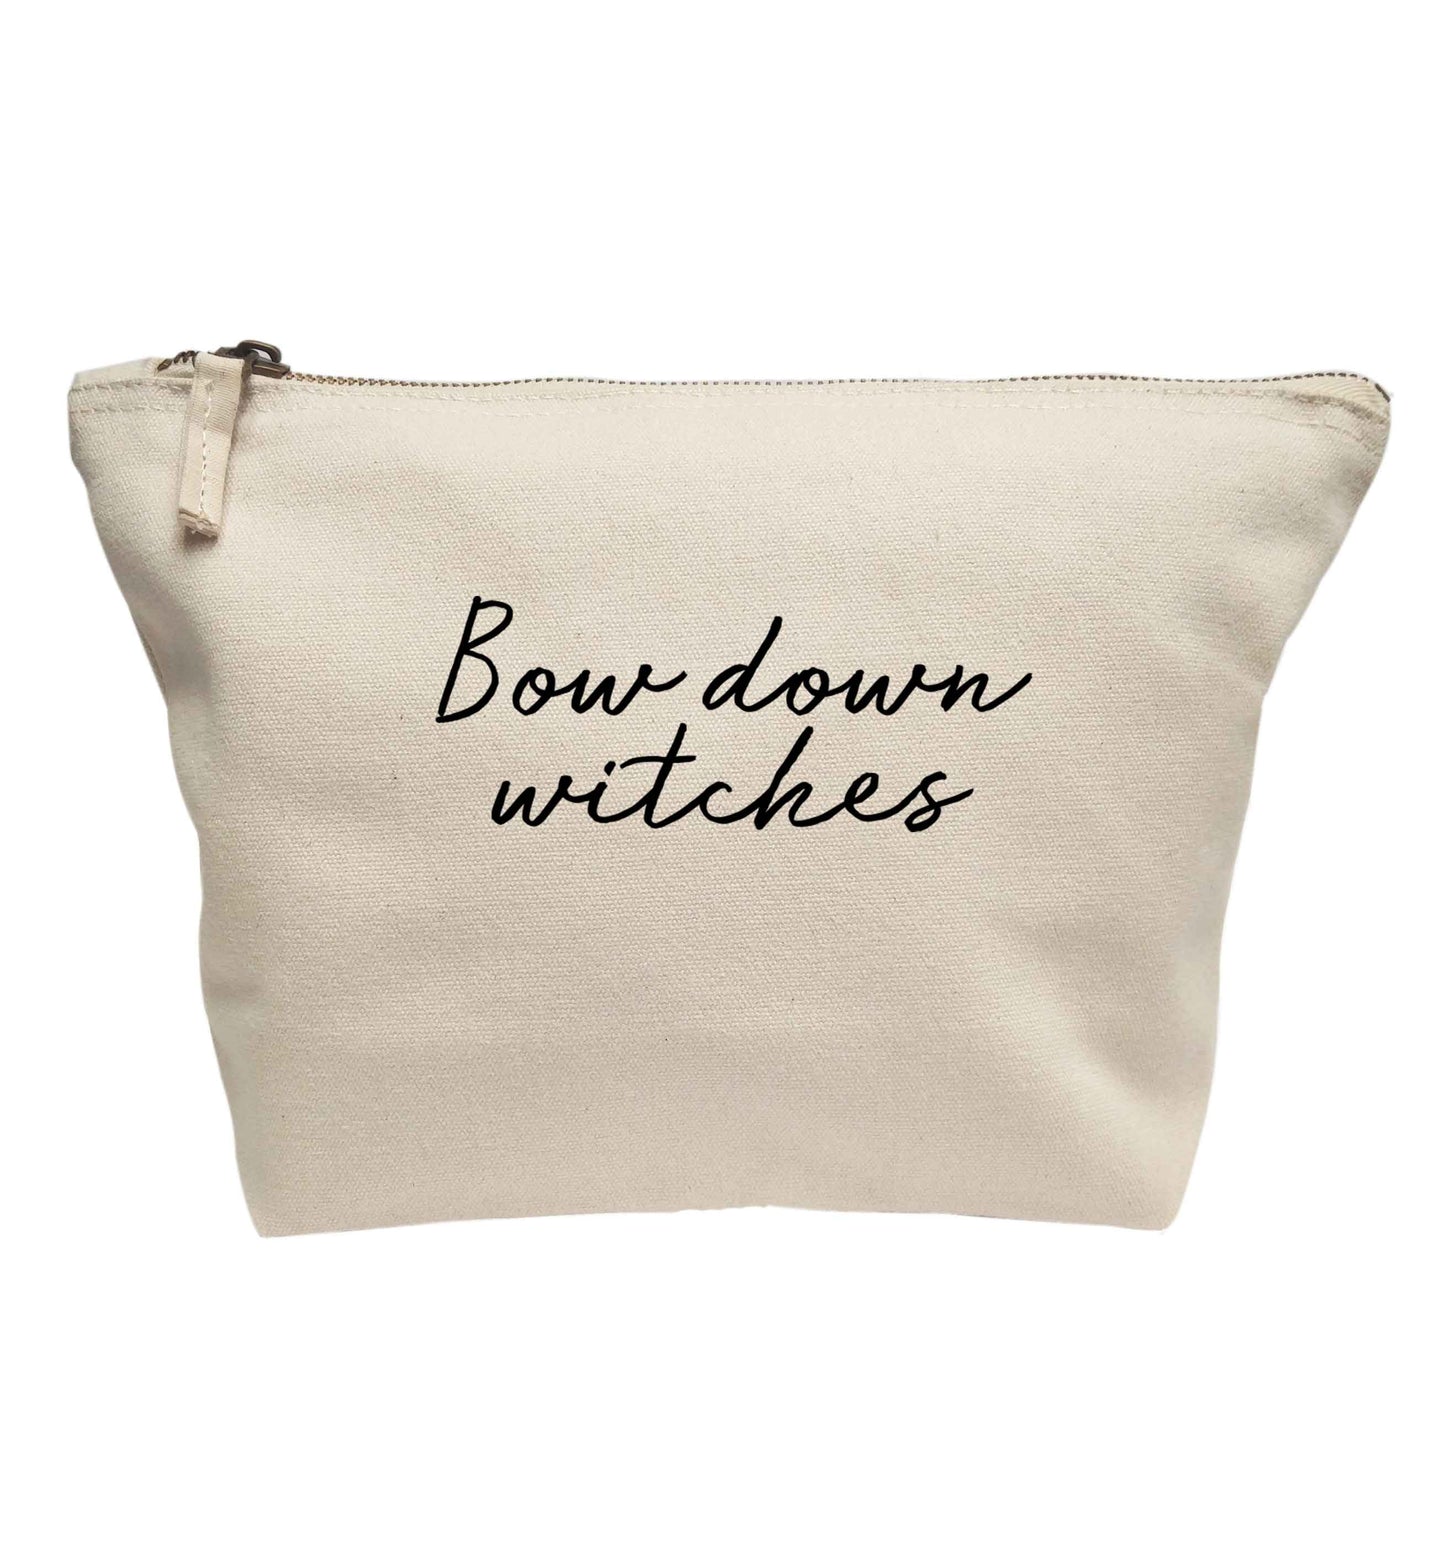 Bow down witches | Makeup / wash bag